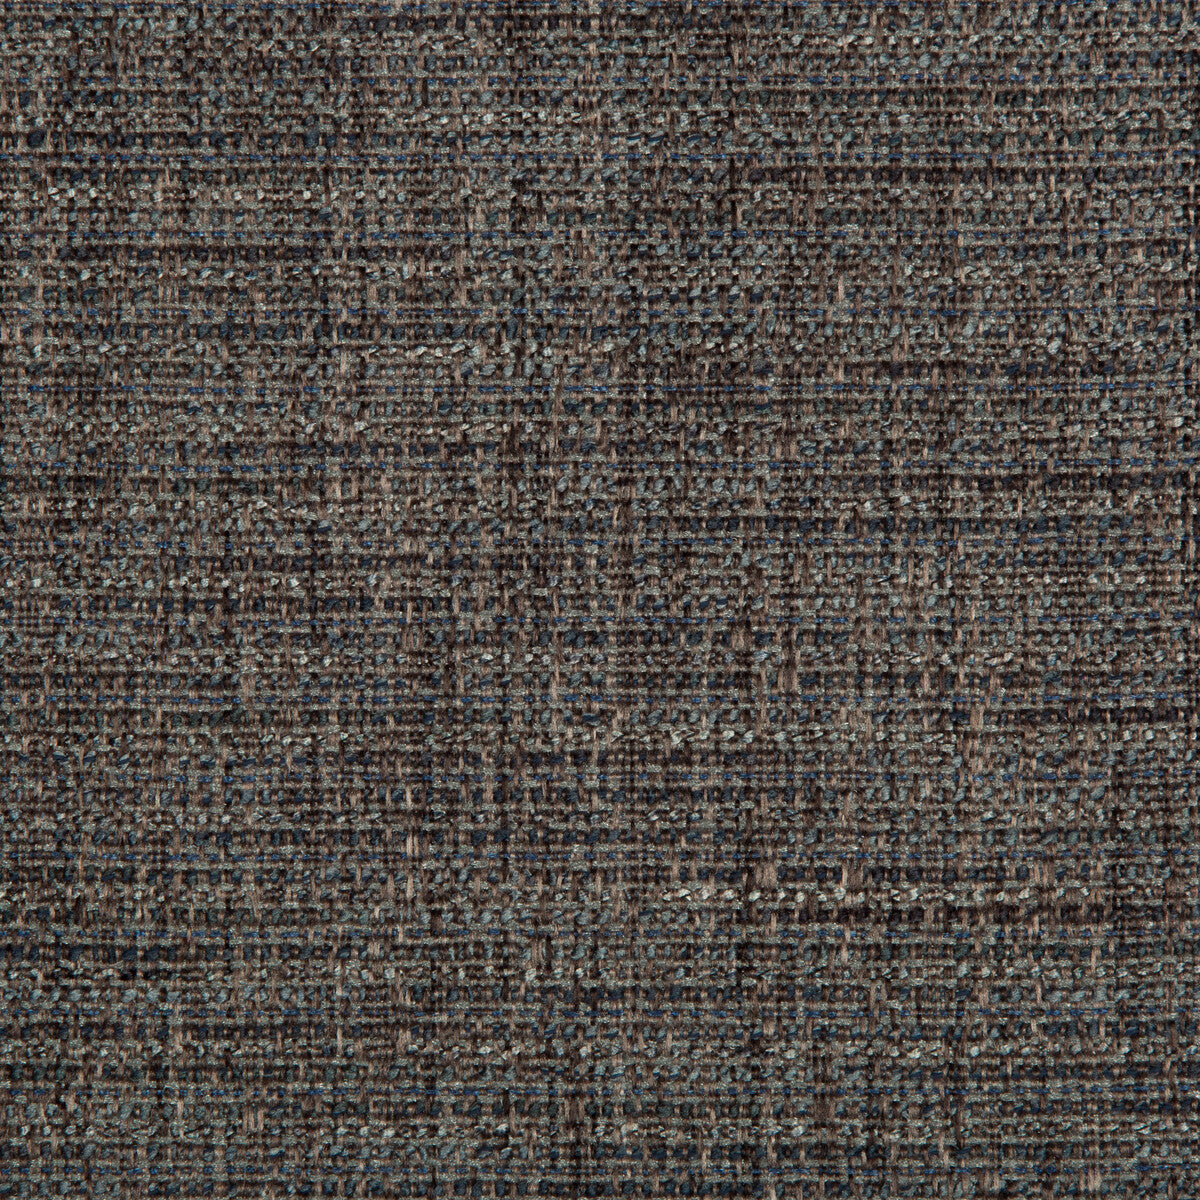 Kravet Contract fabric in 35410-521 color - pattern 35410.521.0 - by Kravet Contract in the Crypton Incase collection